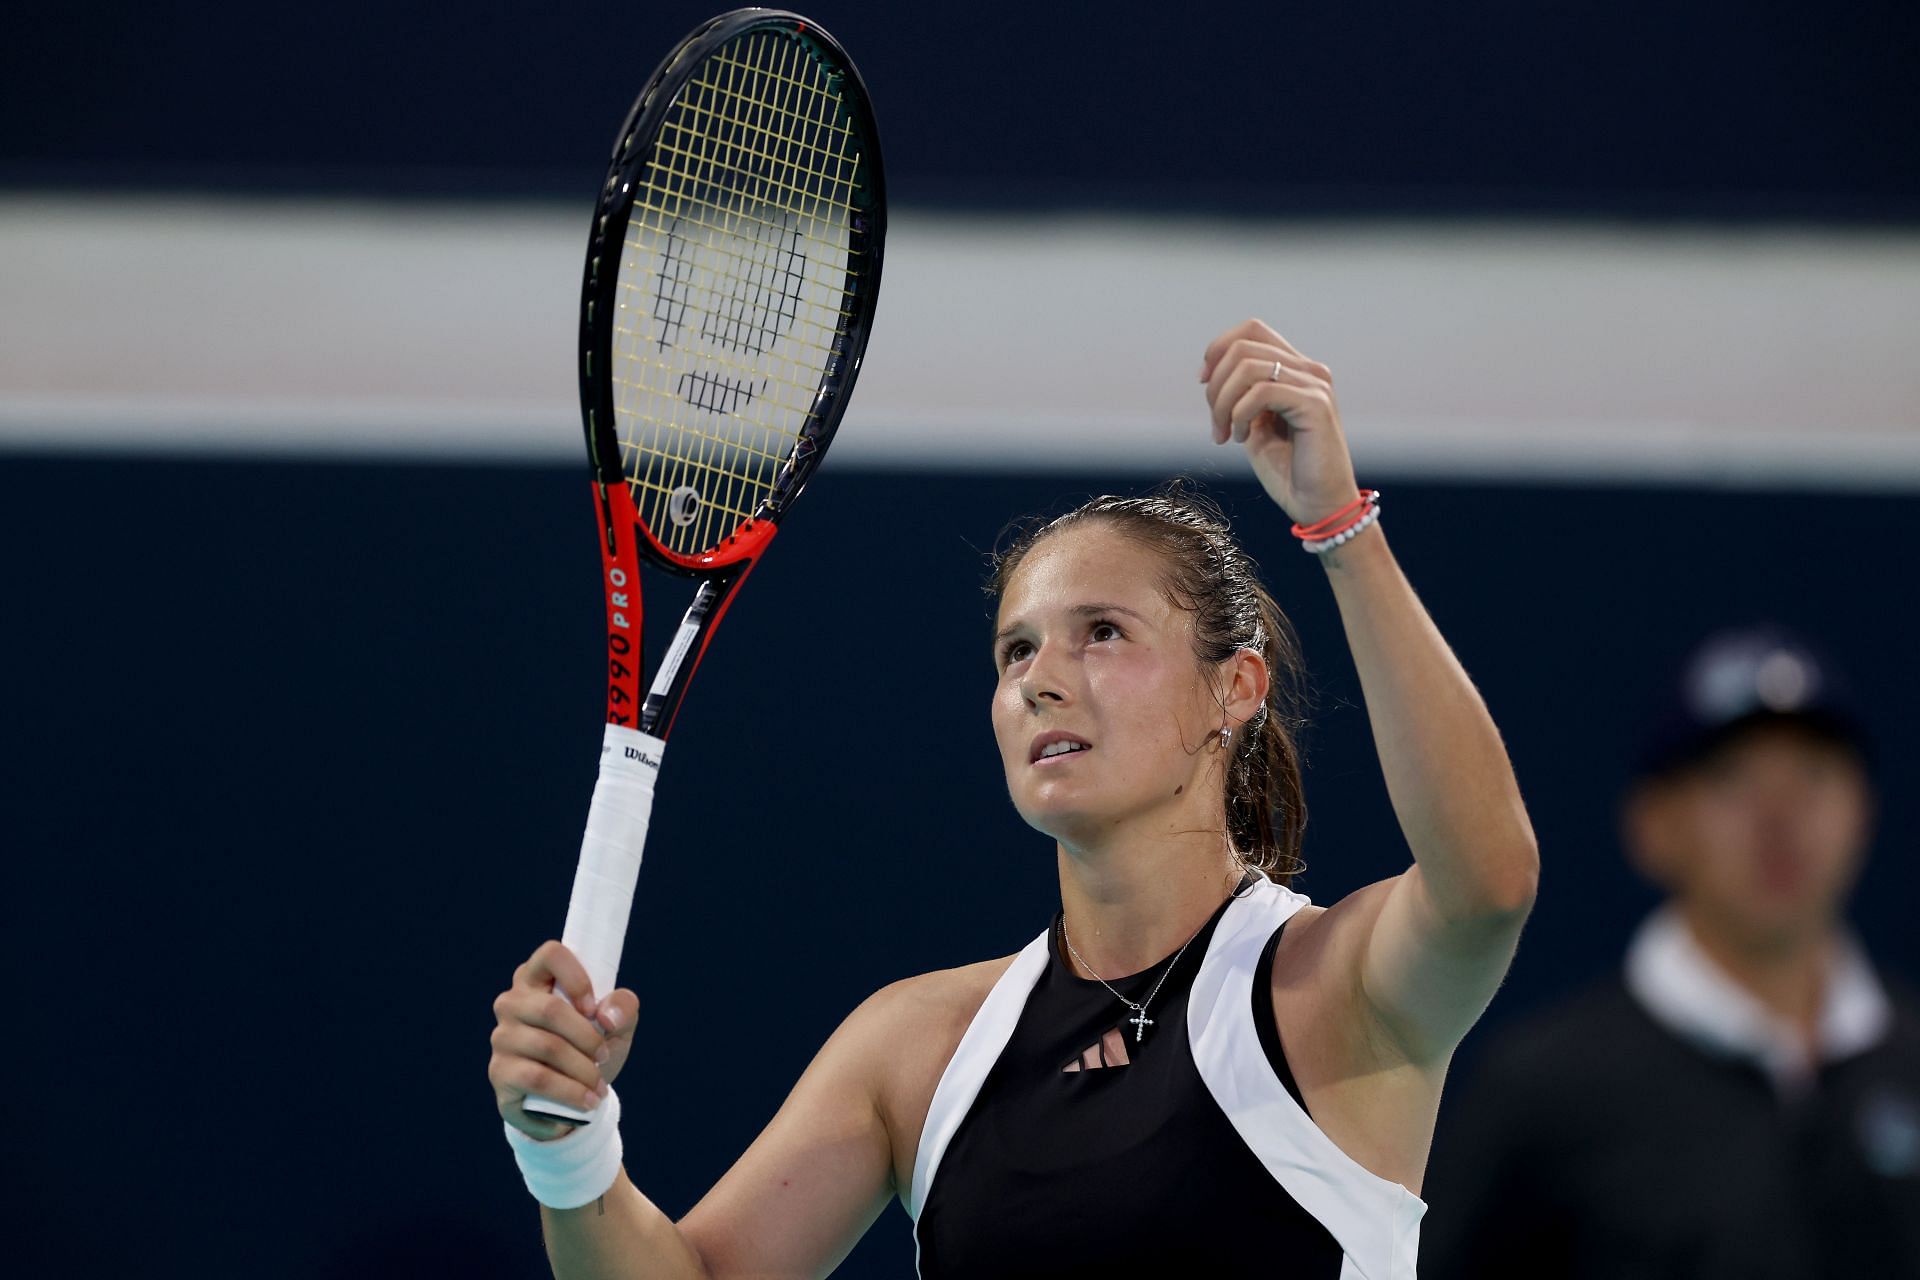 Daria Kasatkina is the 11th seed at the Qatar Open.